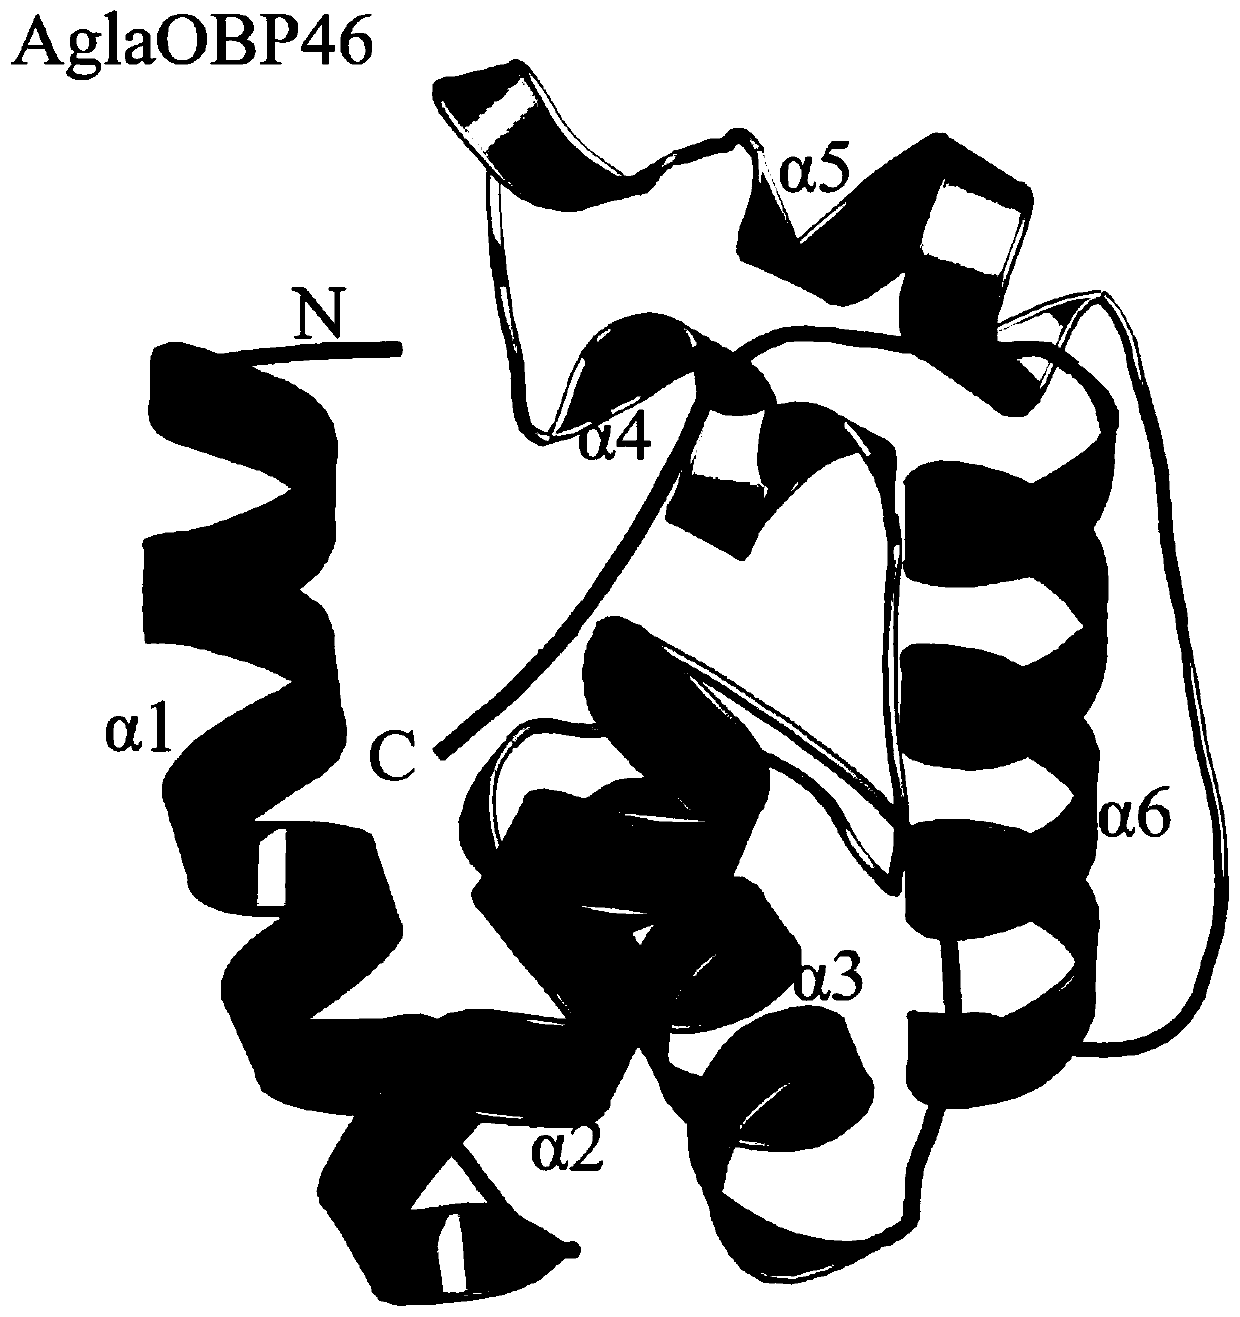 Anoplophora glabripennis odorant binding protein OBP45, OBP46 and application in screening attractants thereof